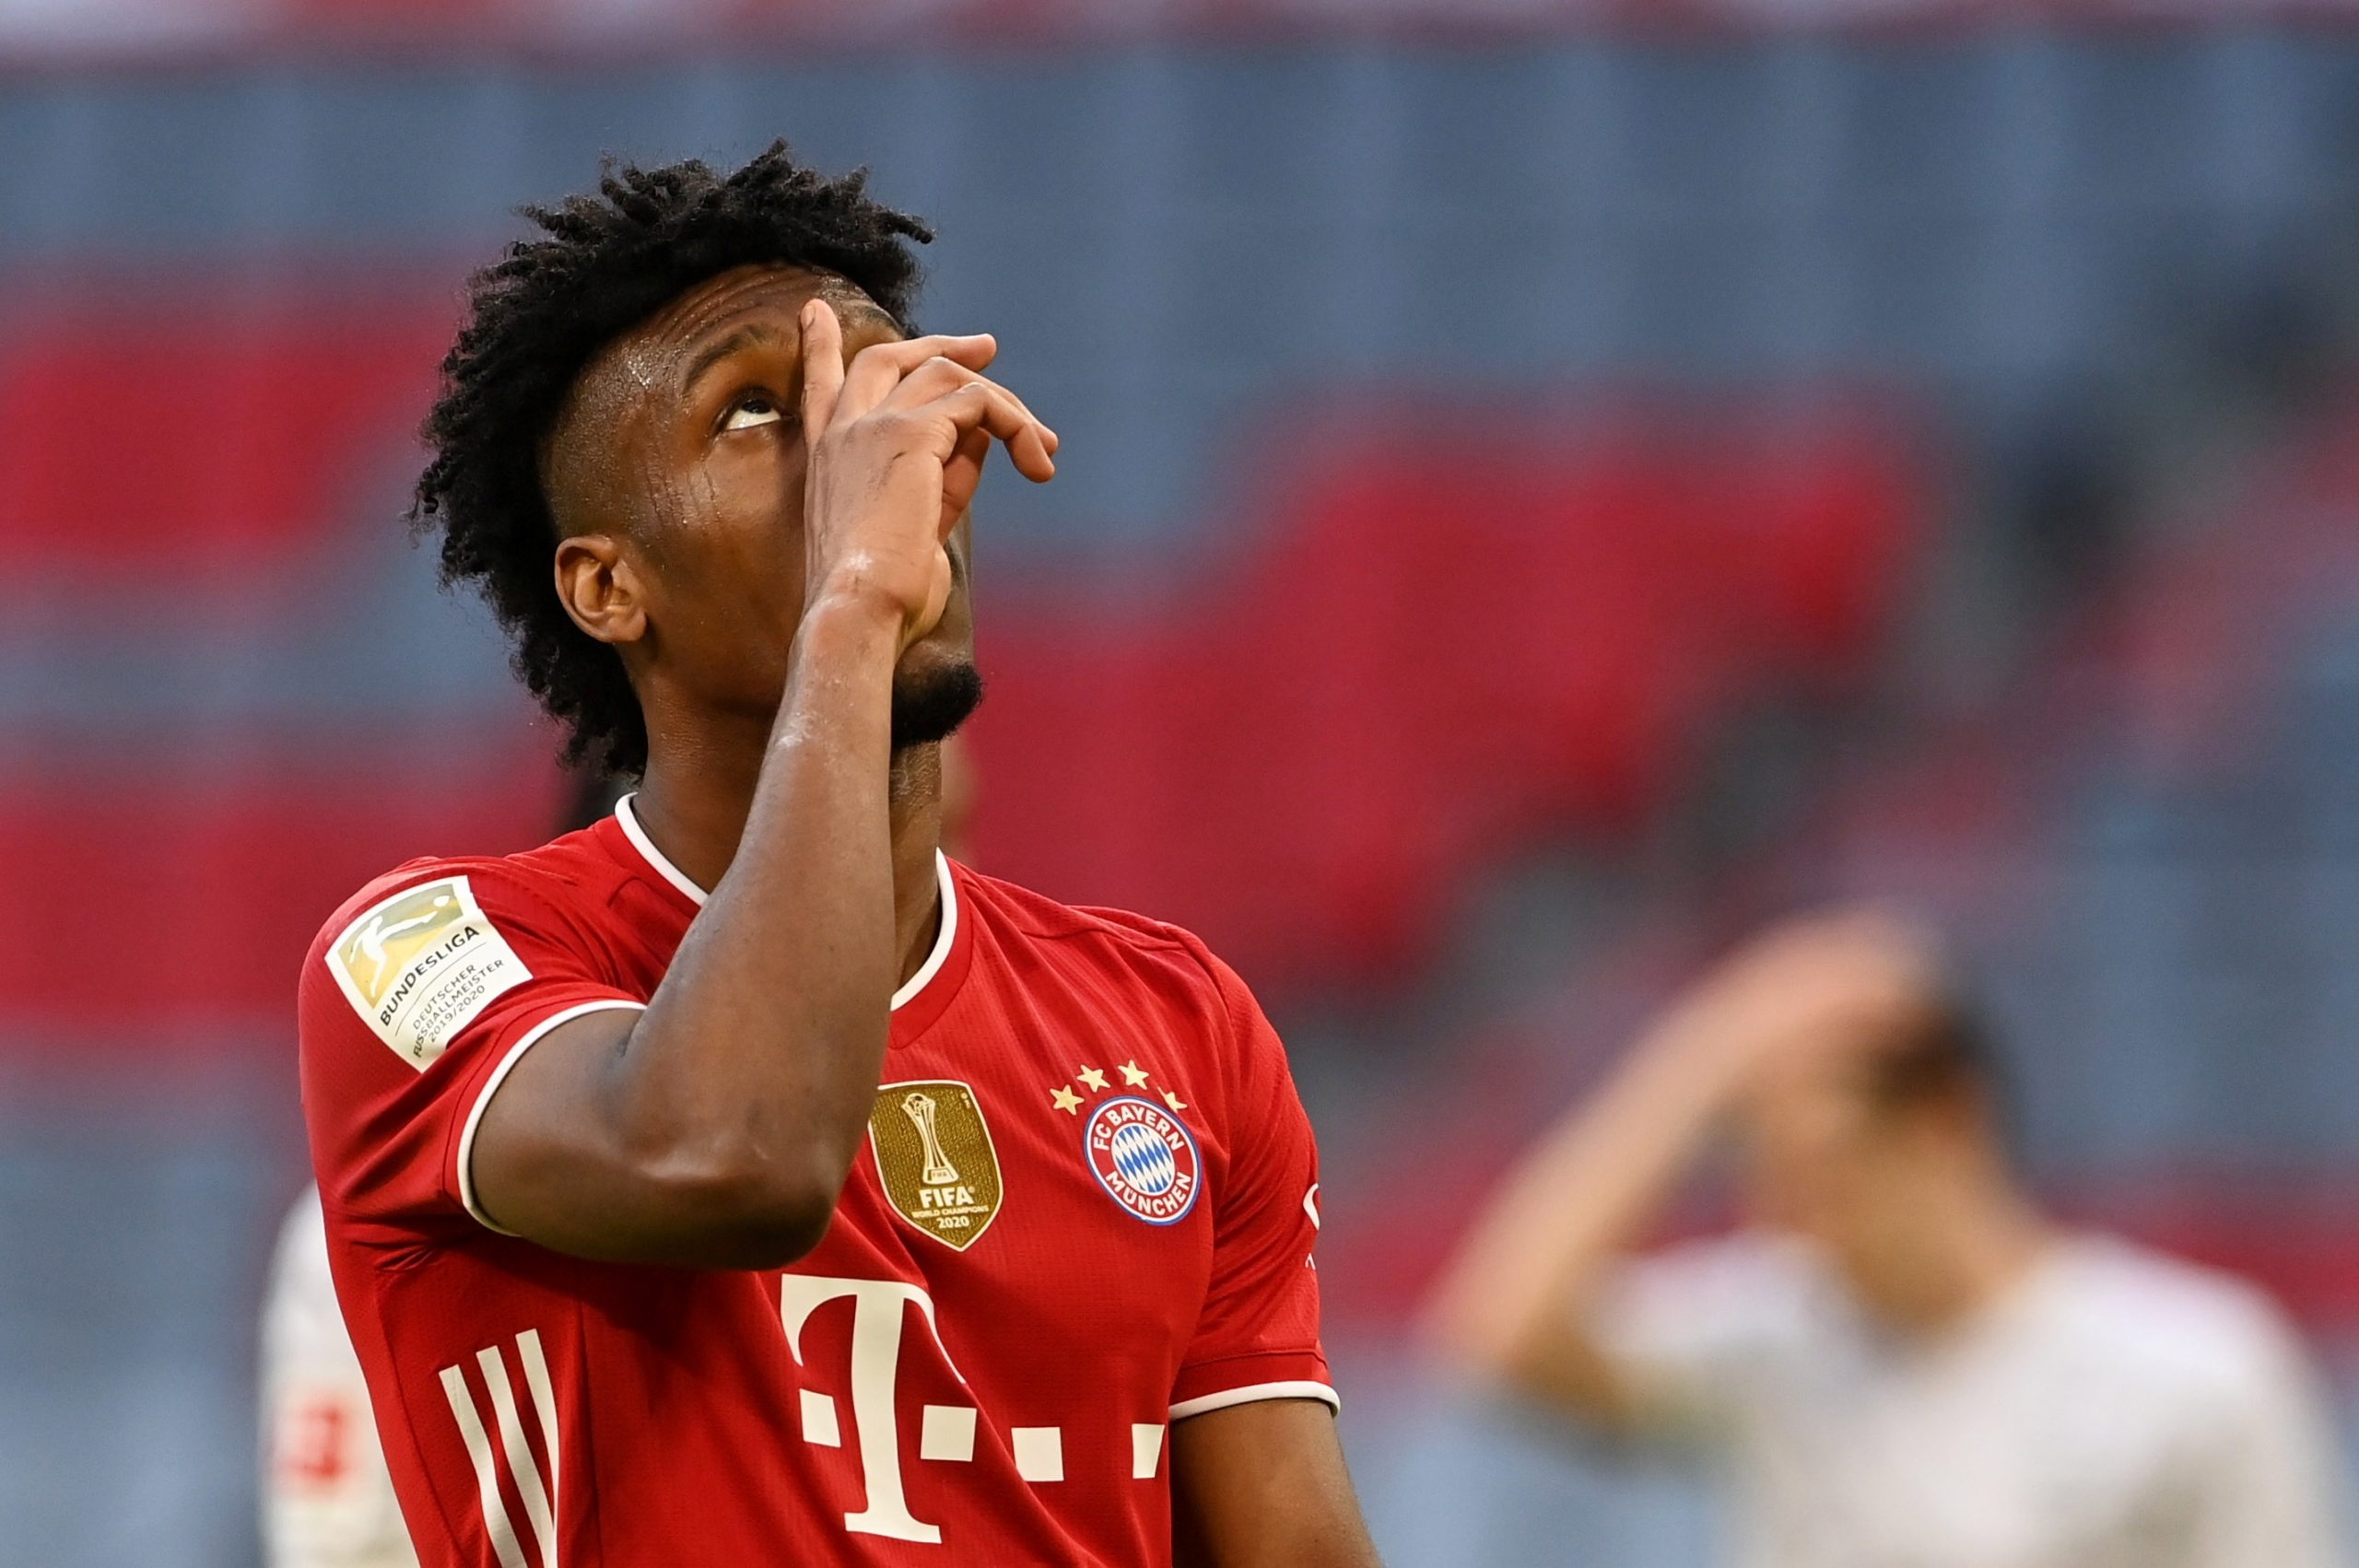 FILE PHOTO: Bundesliga - Bayern Munich v Borussia Moenchengladbach FILE PHOTO: Soccer Football - Bundesliga - Bayern Munich v Borussia Moenchengladbach - Allianz Arena, Munich, Germany - May 8, 2021 Bayern Munich's Kingsley Coman celebrates scoring their fourth goal Pool via REUTERS/Christof Stache DFL regulations prohibit any use of photographs as image sequences and/or quasi-video./File Photo CHRISTOF STACHE